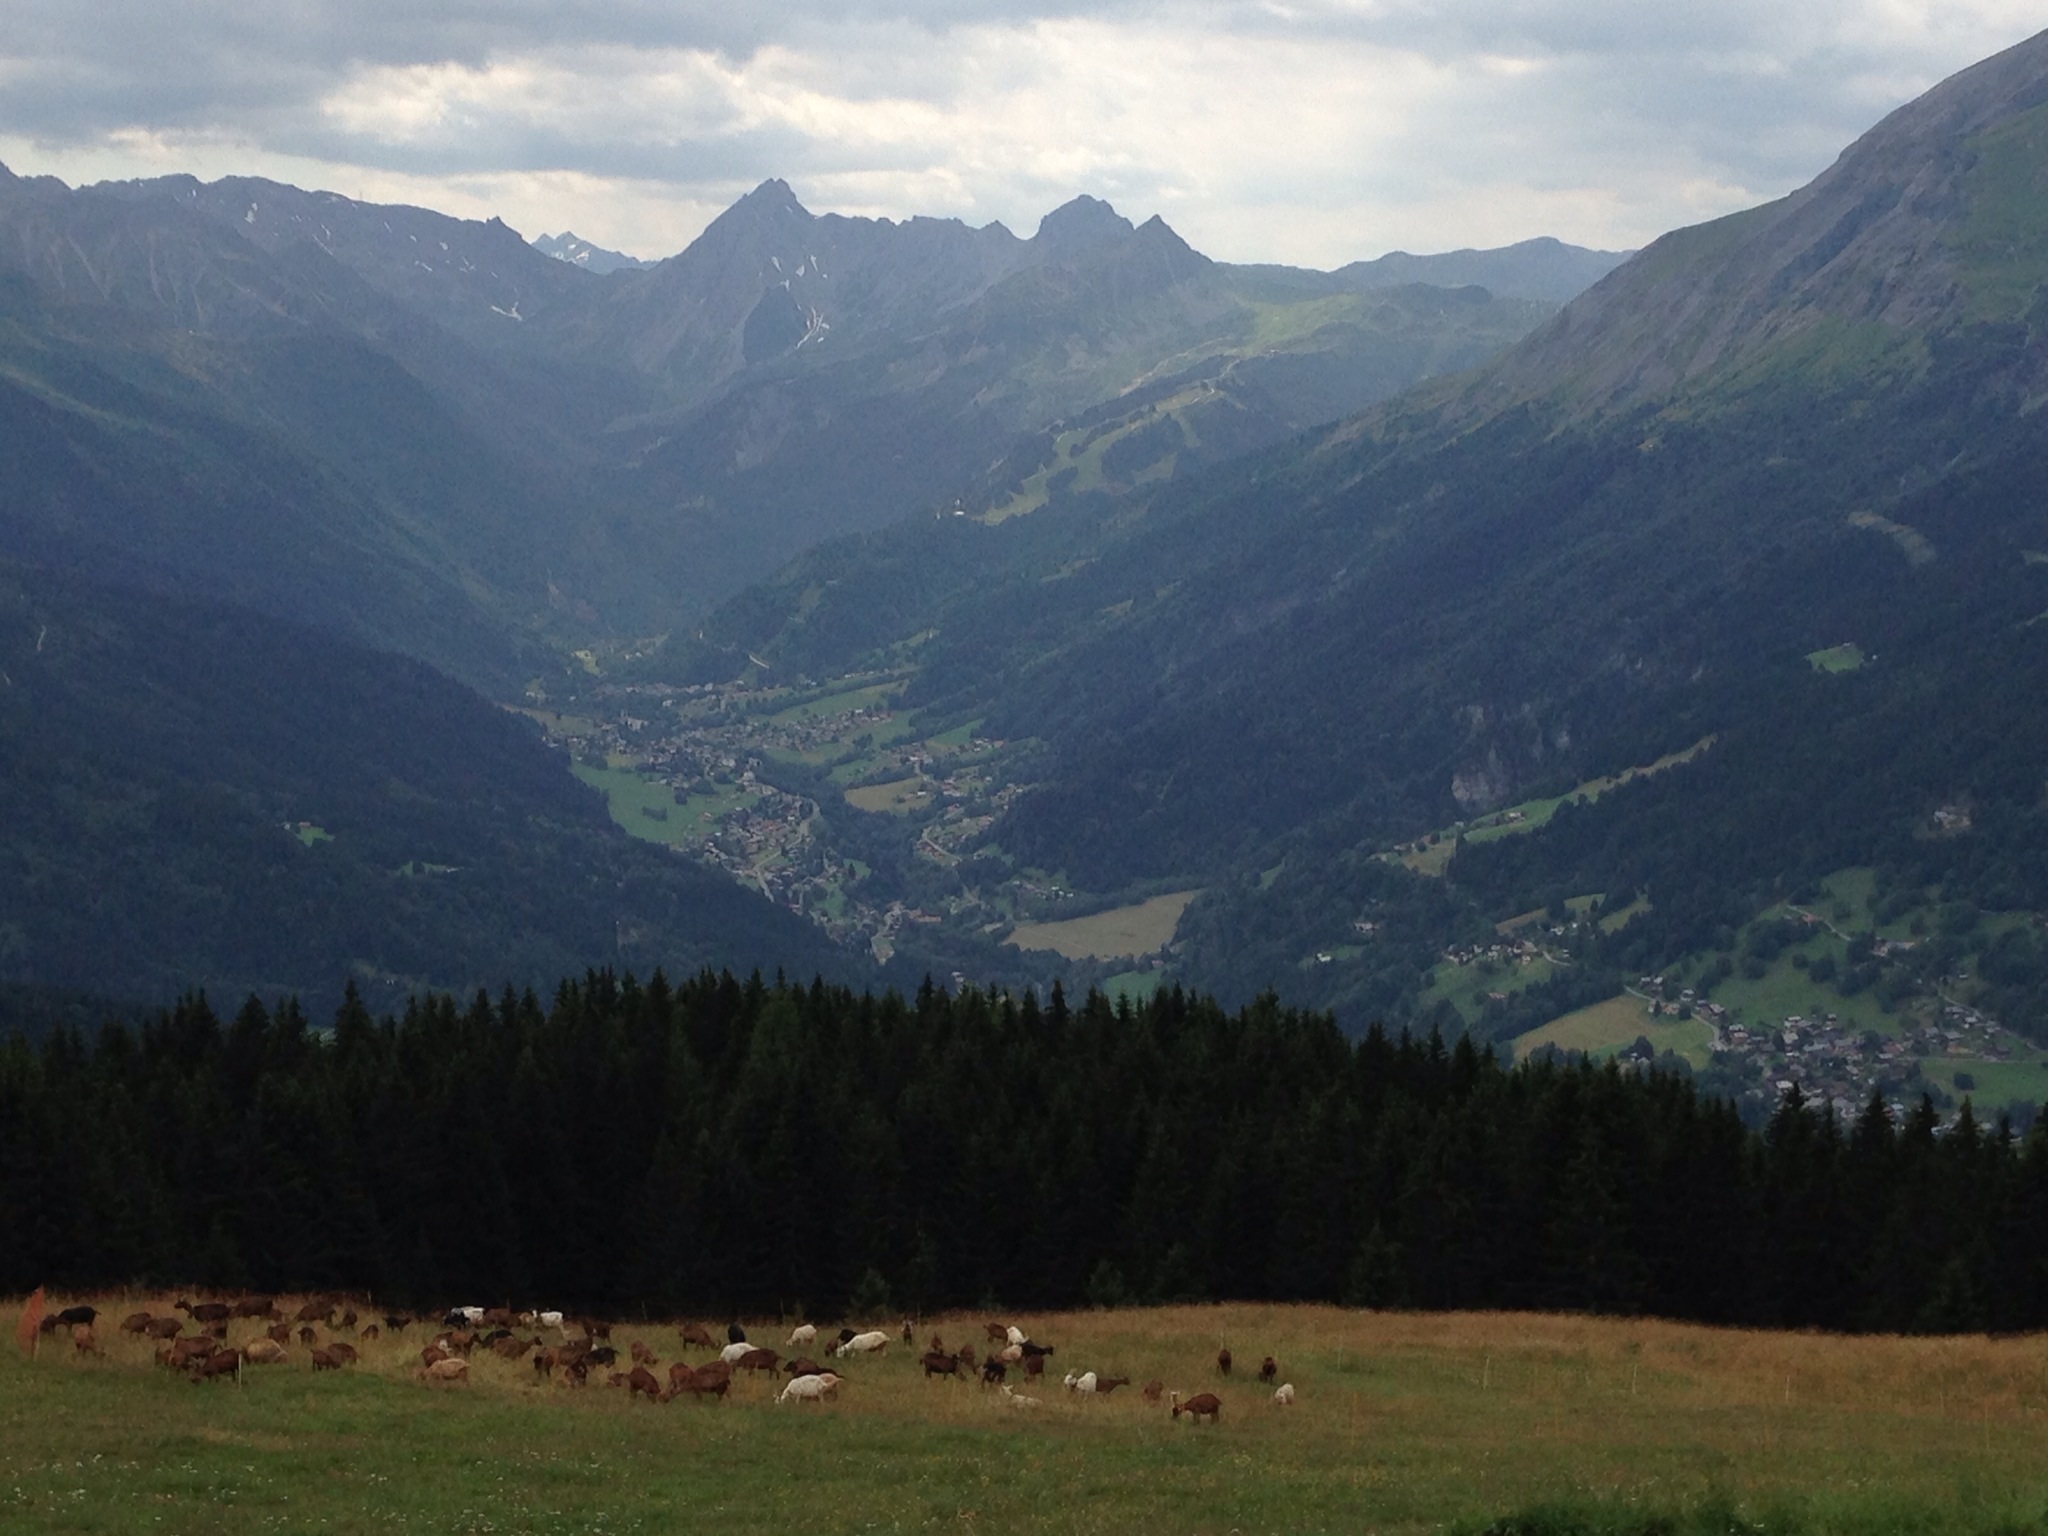 Looking up valley towards Les Contamines, France